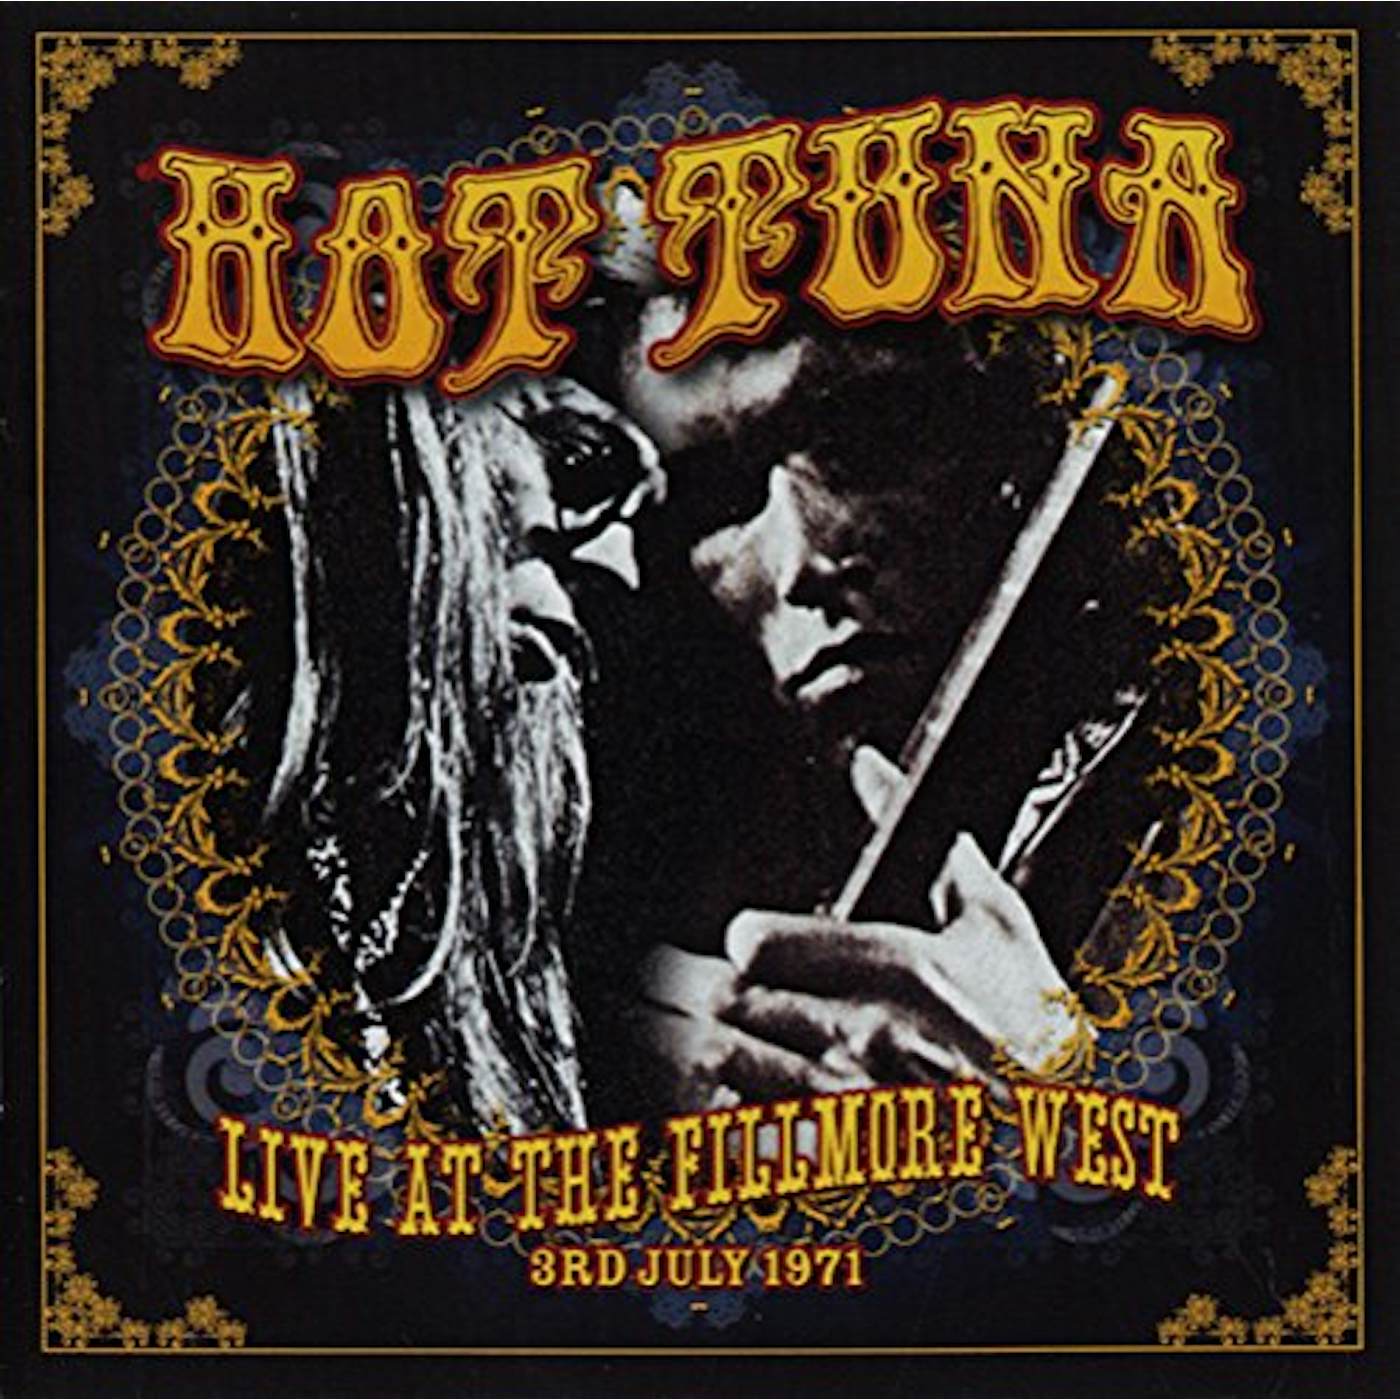 Hot Tuna LIVE AT THE FILLMORE WEST 3RD JULY 1971 CD